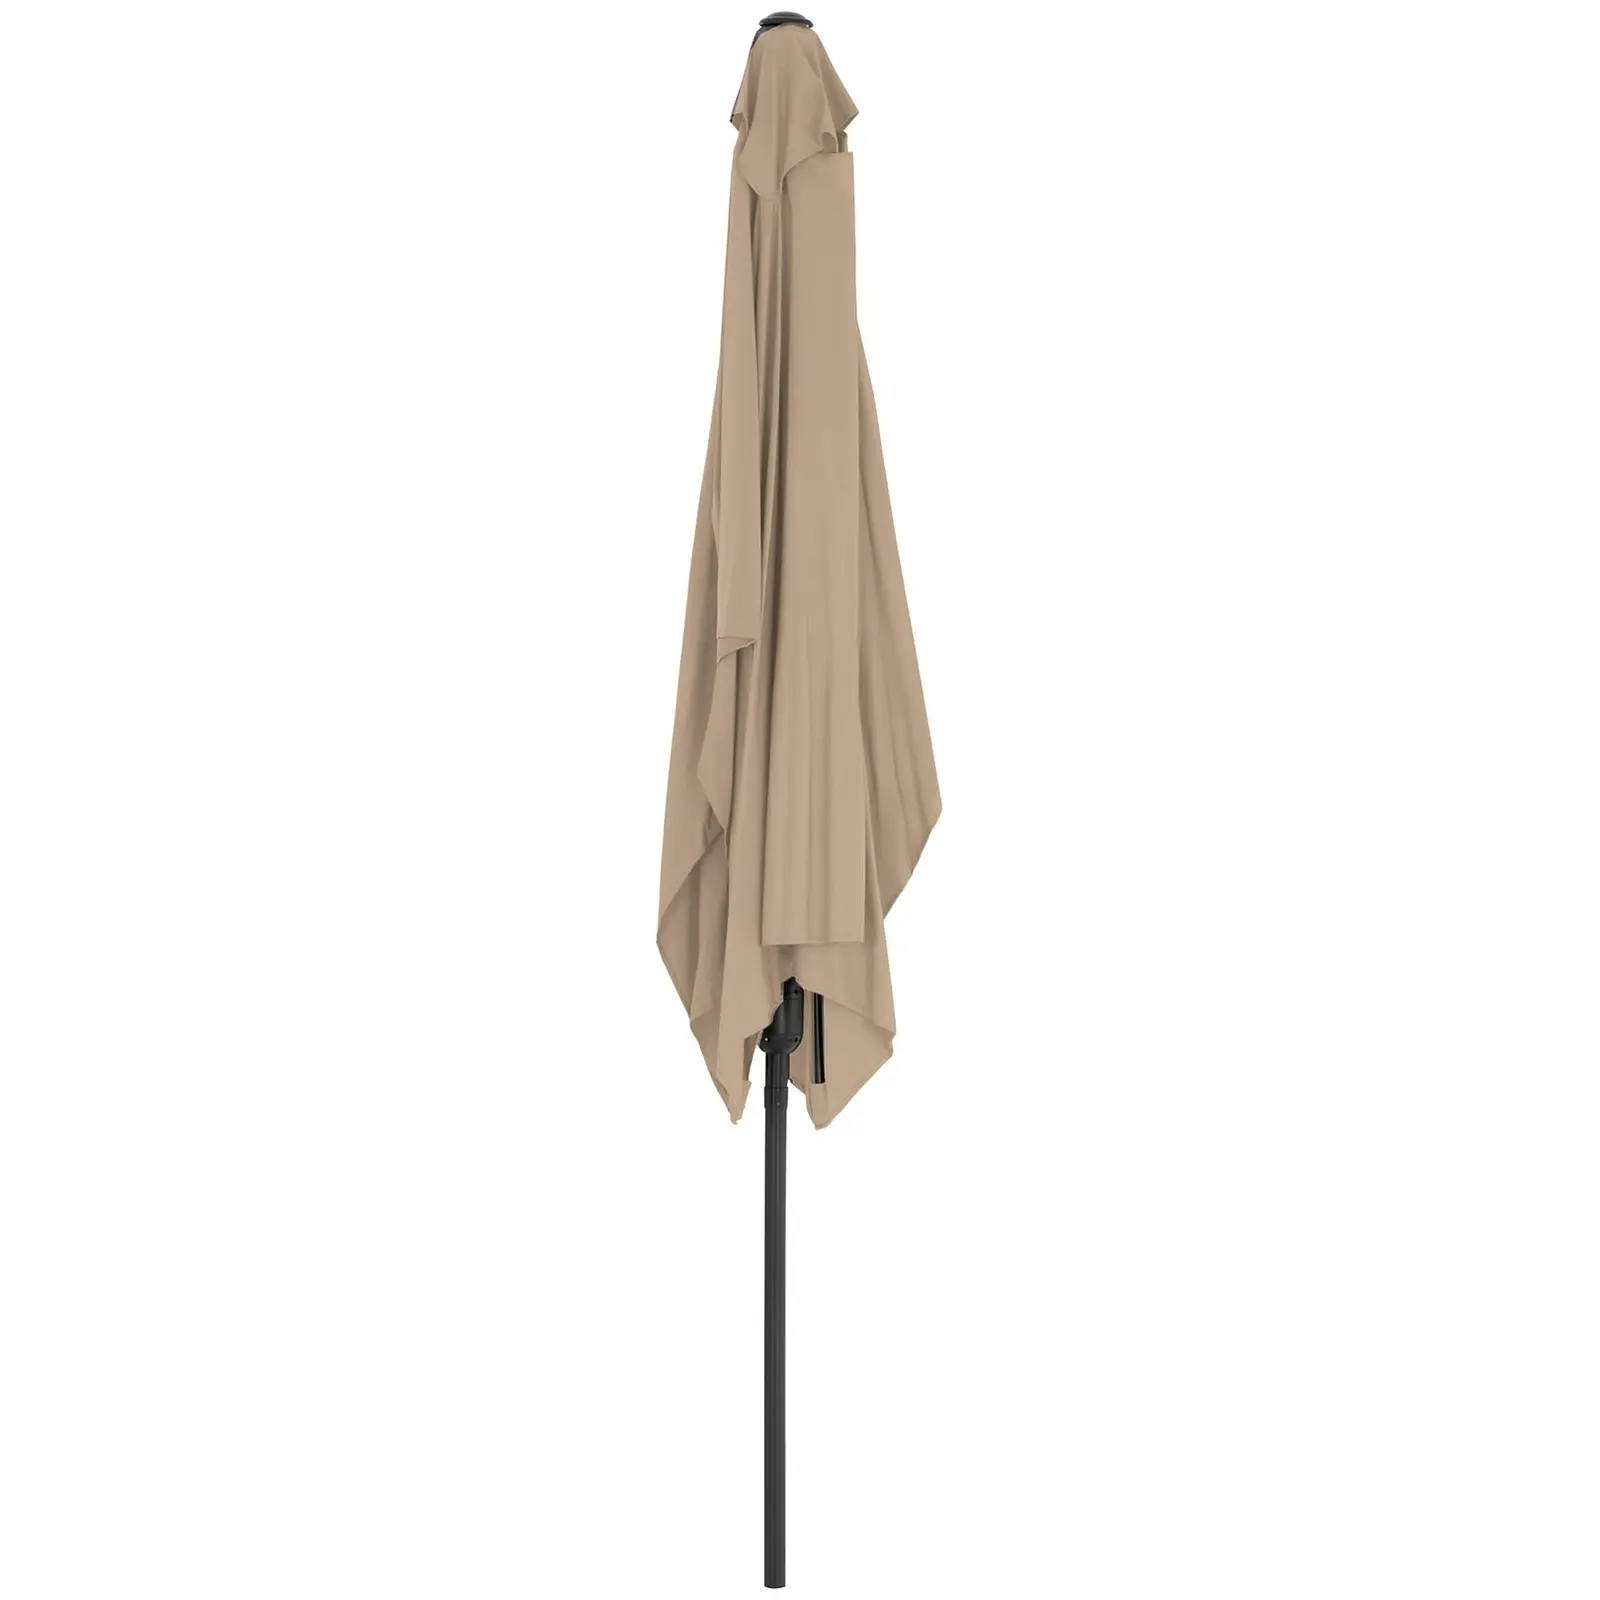 Grand parasol - Taupe - Rectangulaire - 200 x 300 cm - Inclinable